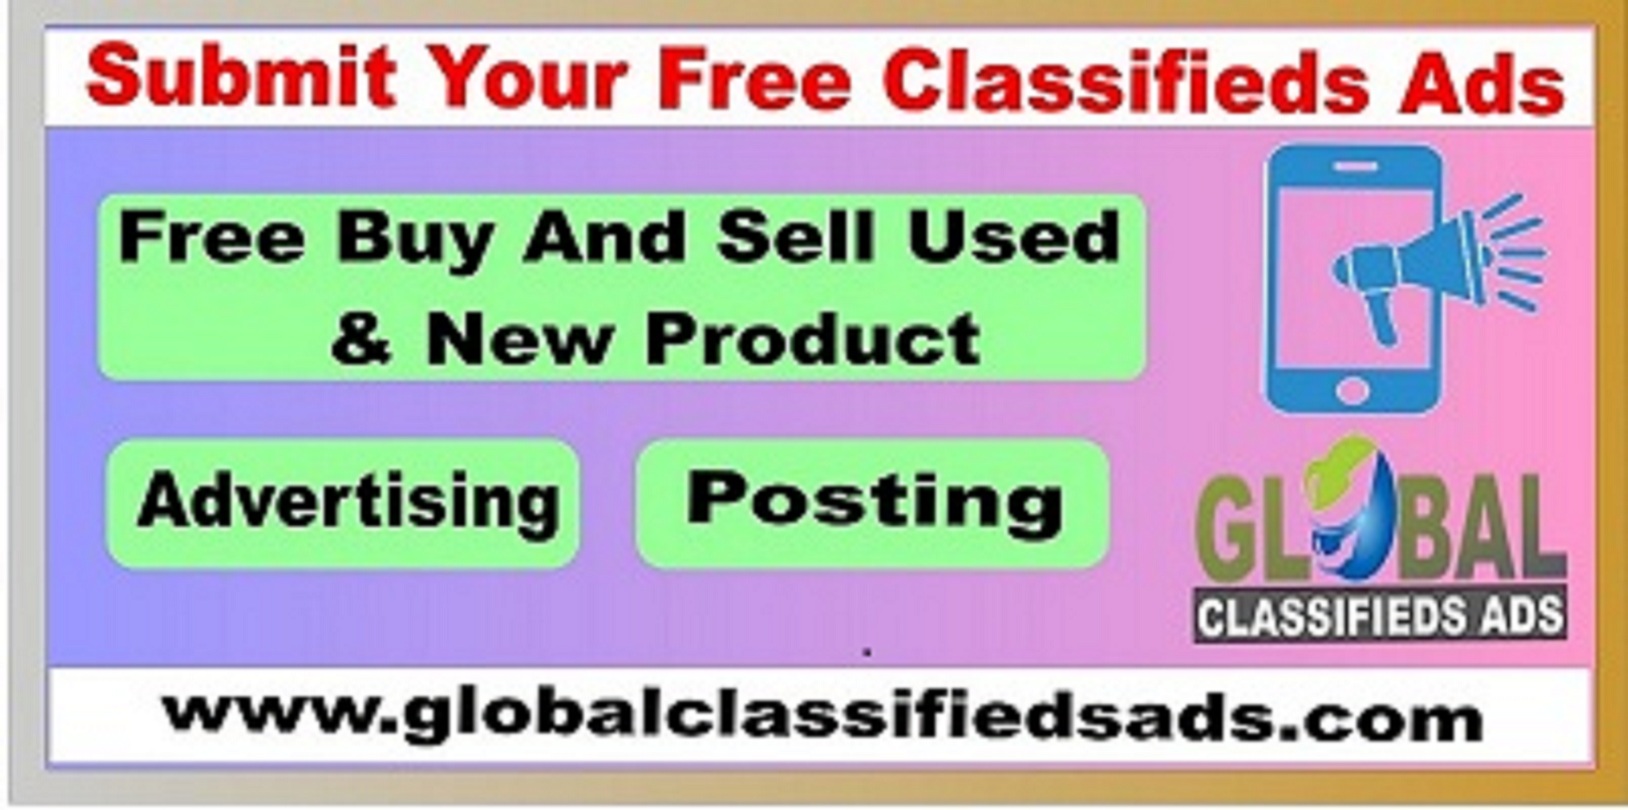 >Post Free Global Classified Ads | Local Classified AdsServicesAdvertising - DesignAll Indiaother